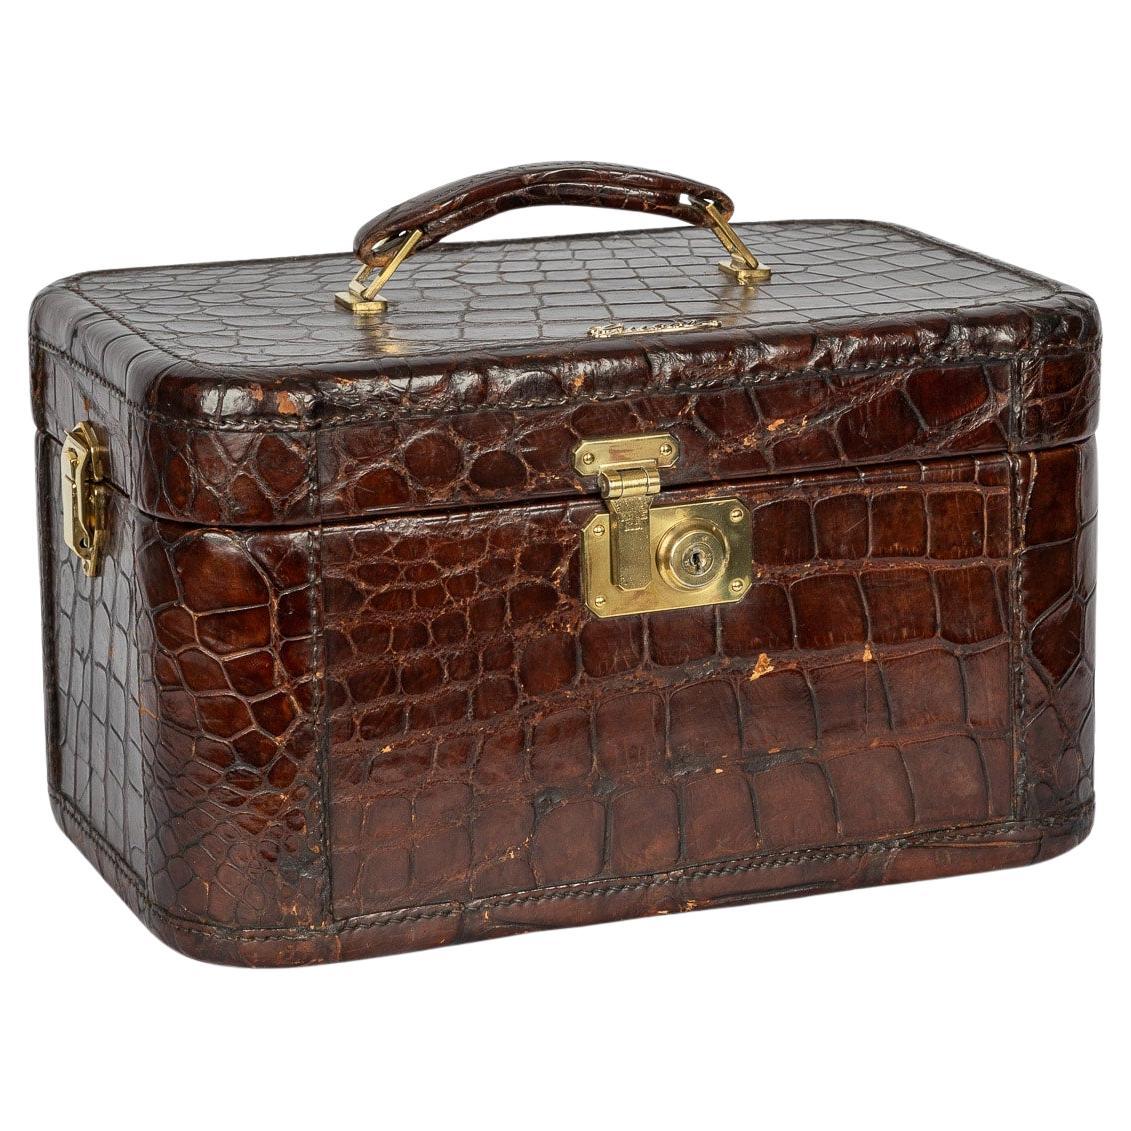 20th Century Gucci Crocodile Leather & Brass Overnight Travel Vanity Case c.1960 For Sale